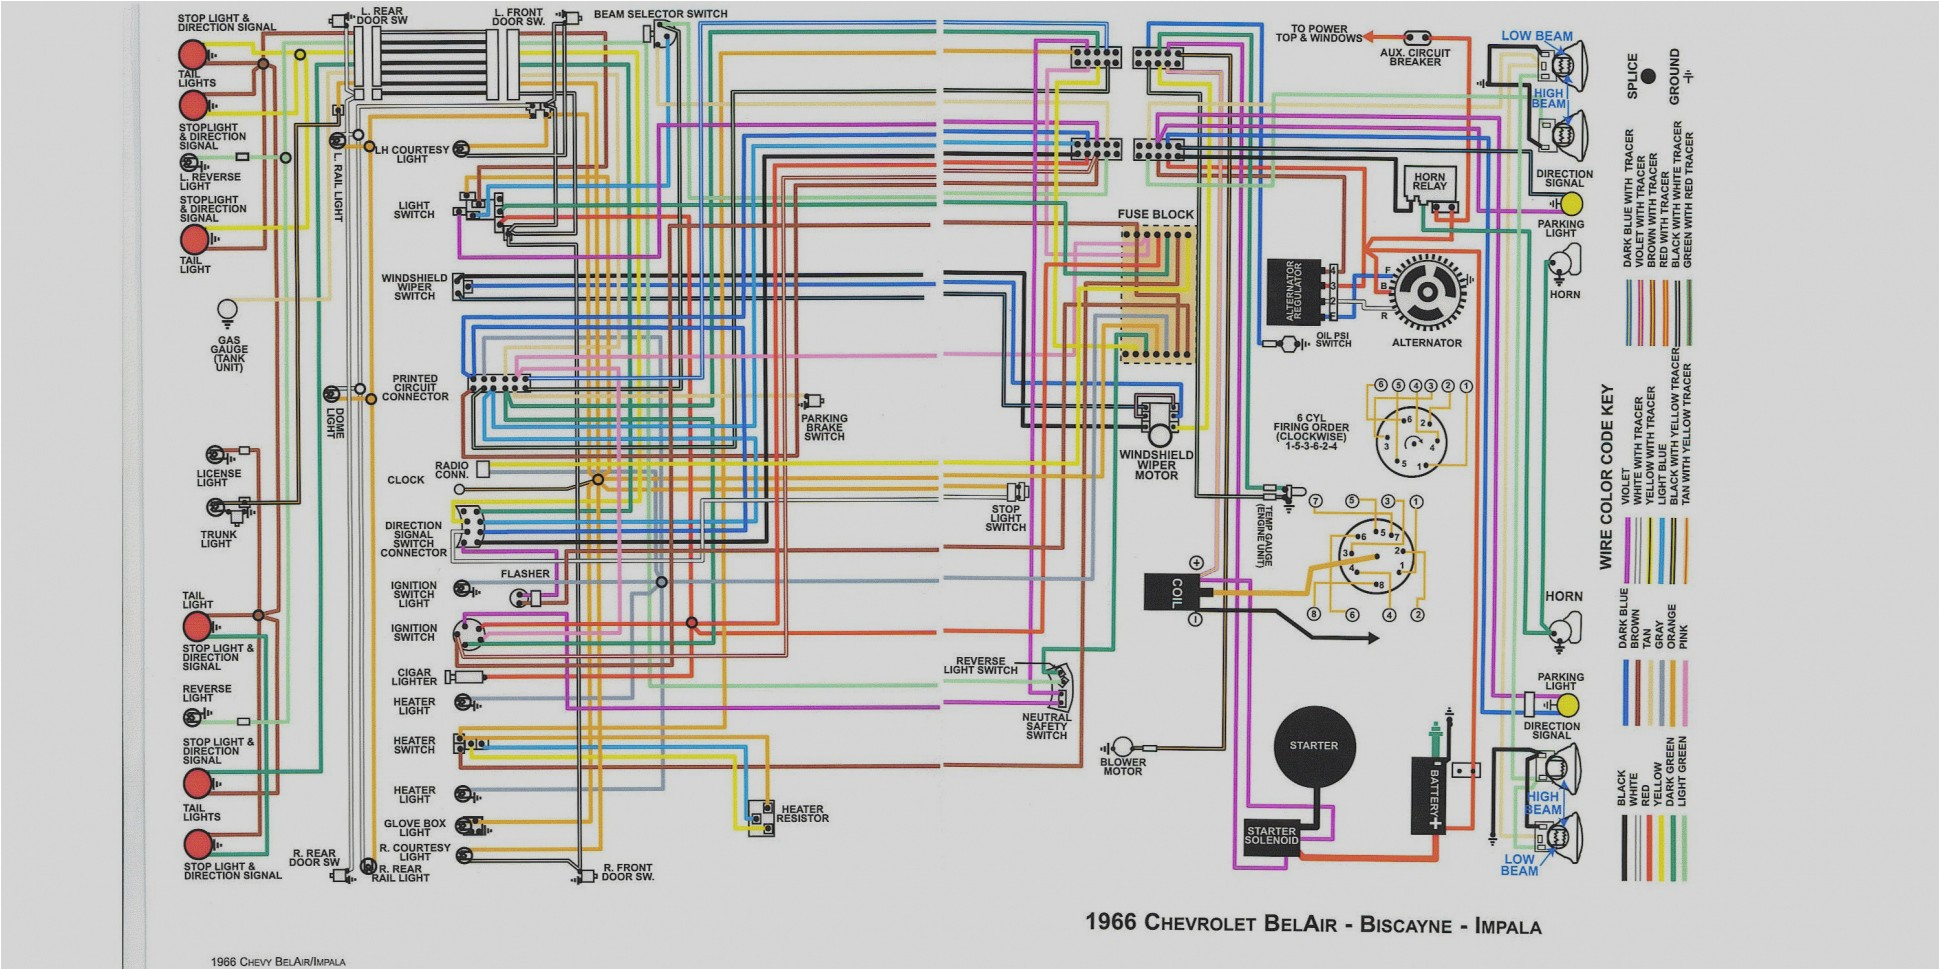 68 impala wiring diagram free picture schematic wiring diagram view 68 chevy impala radio wiring diagram